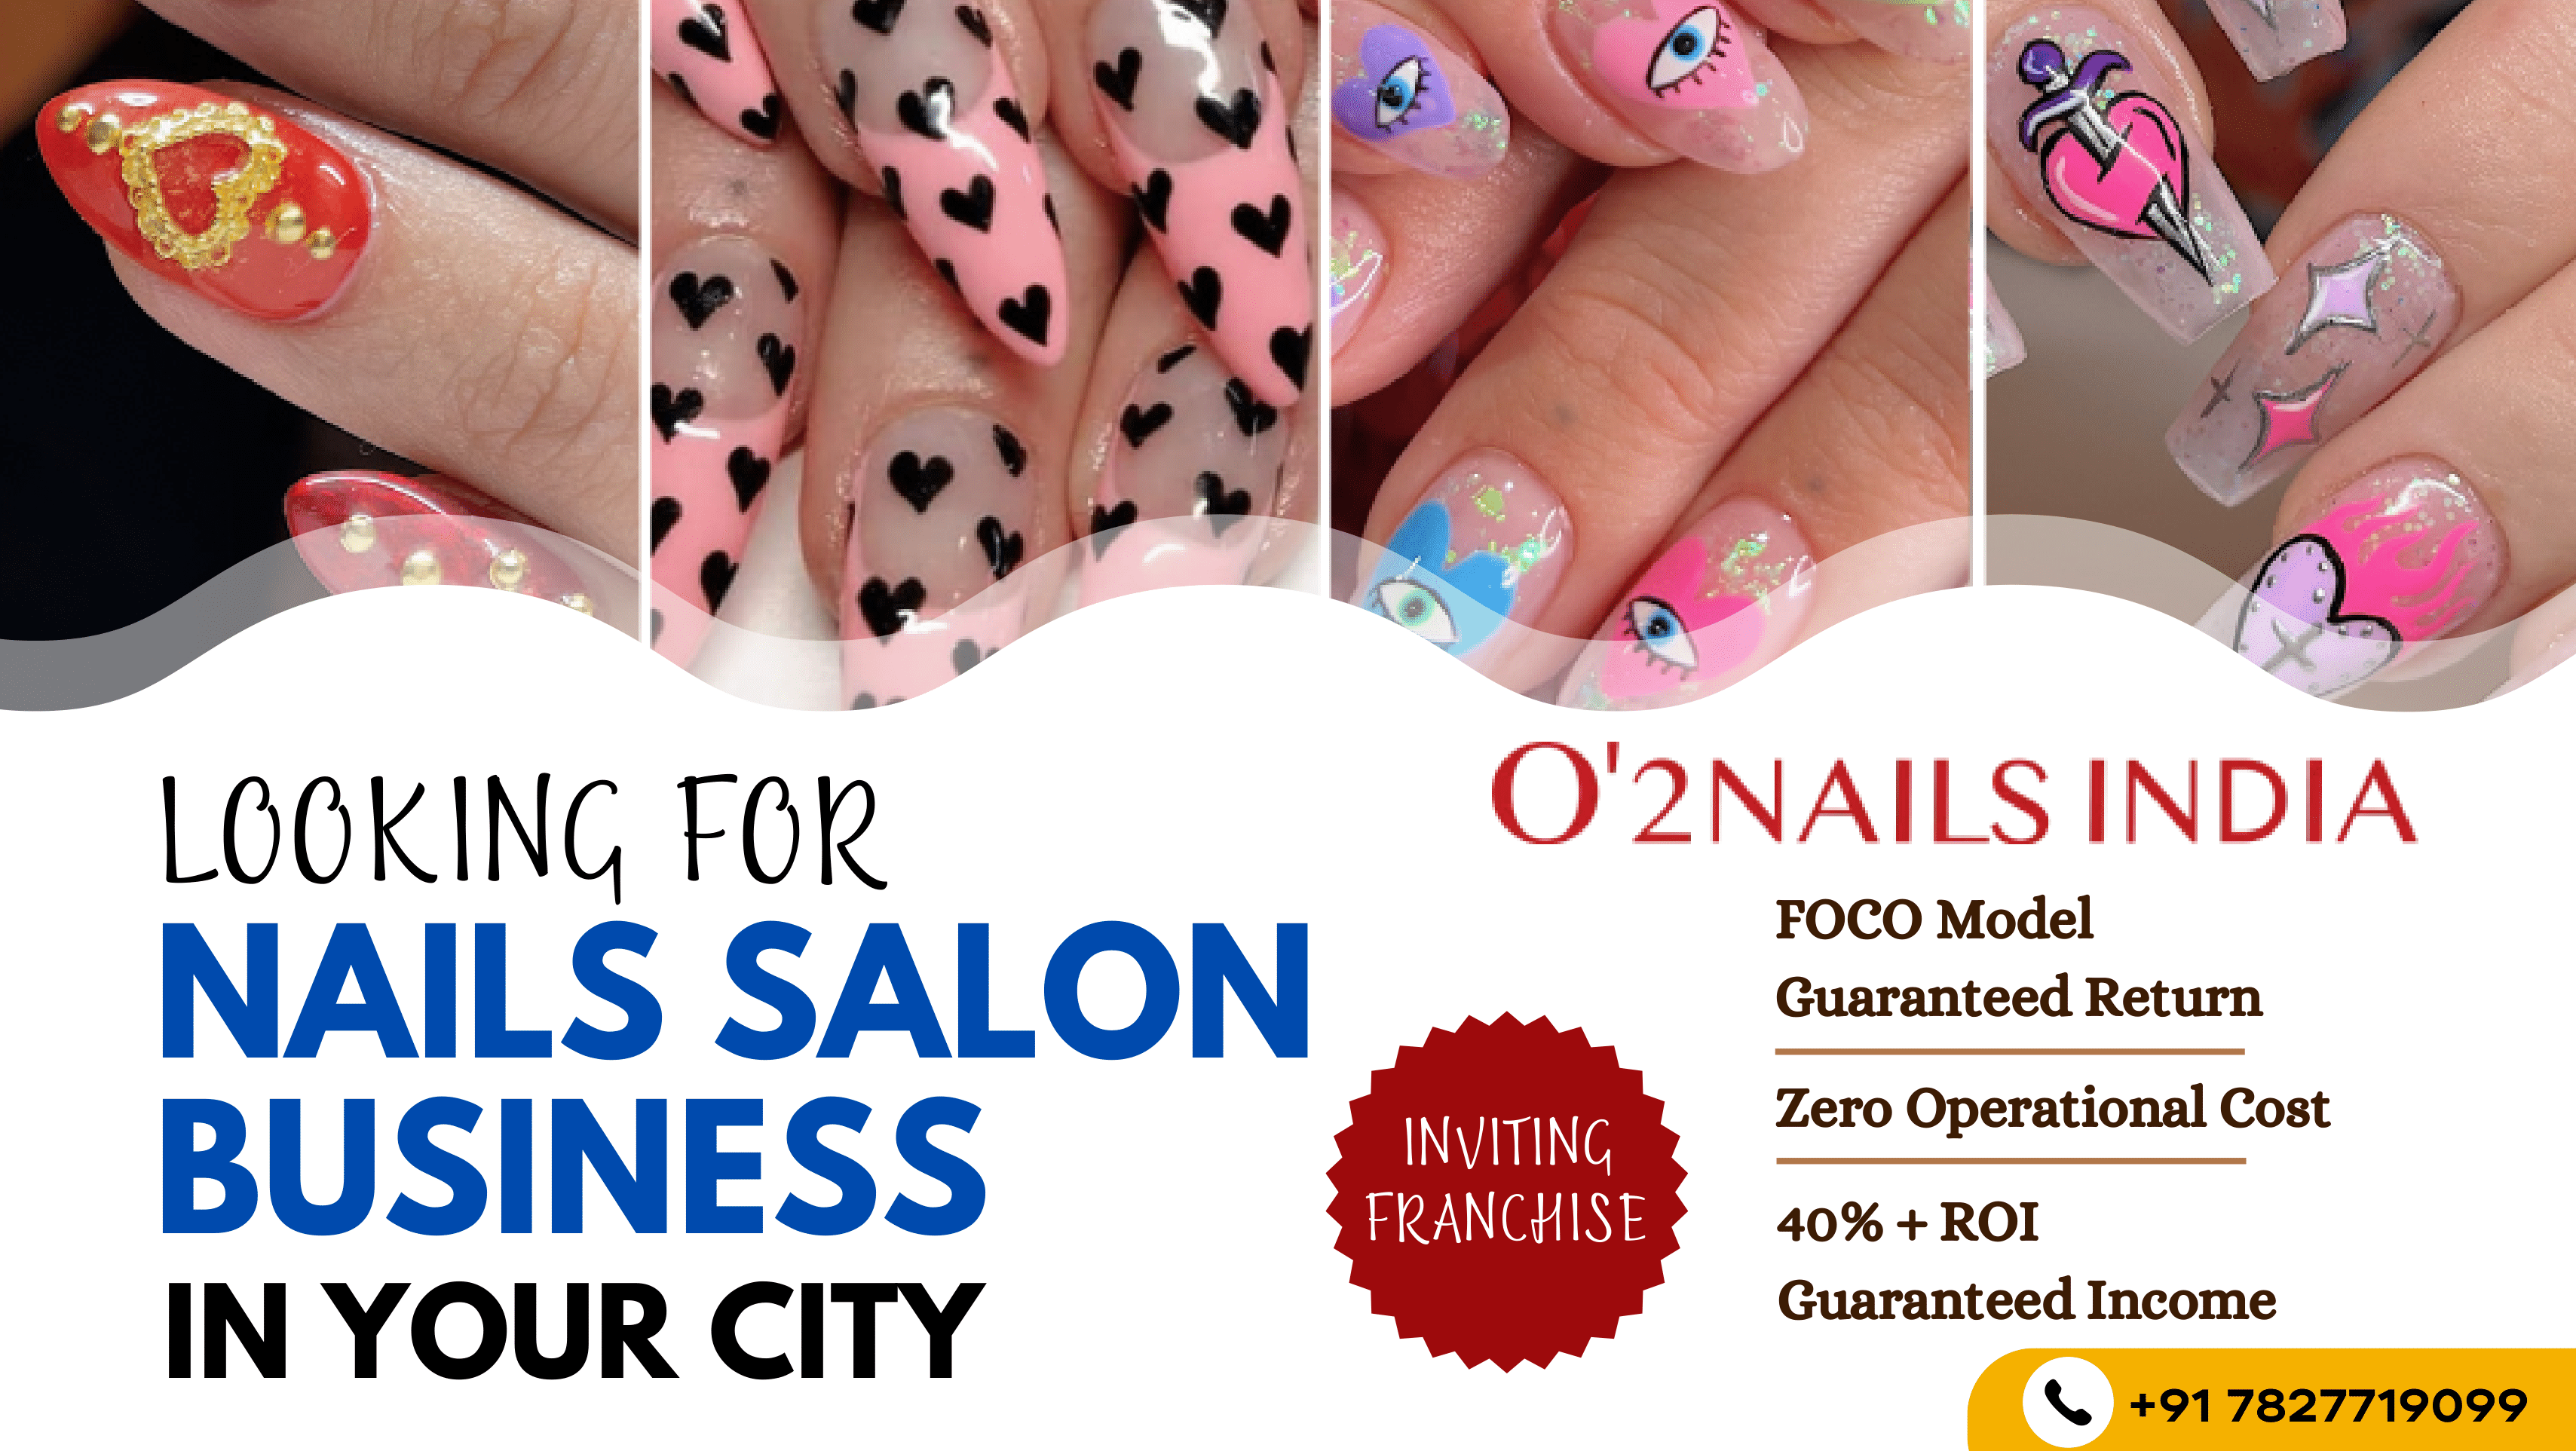 Start Your Business Today with an O2 Nails Franchise Your Path to Success